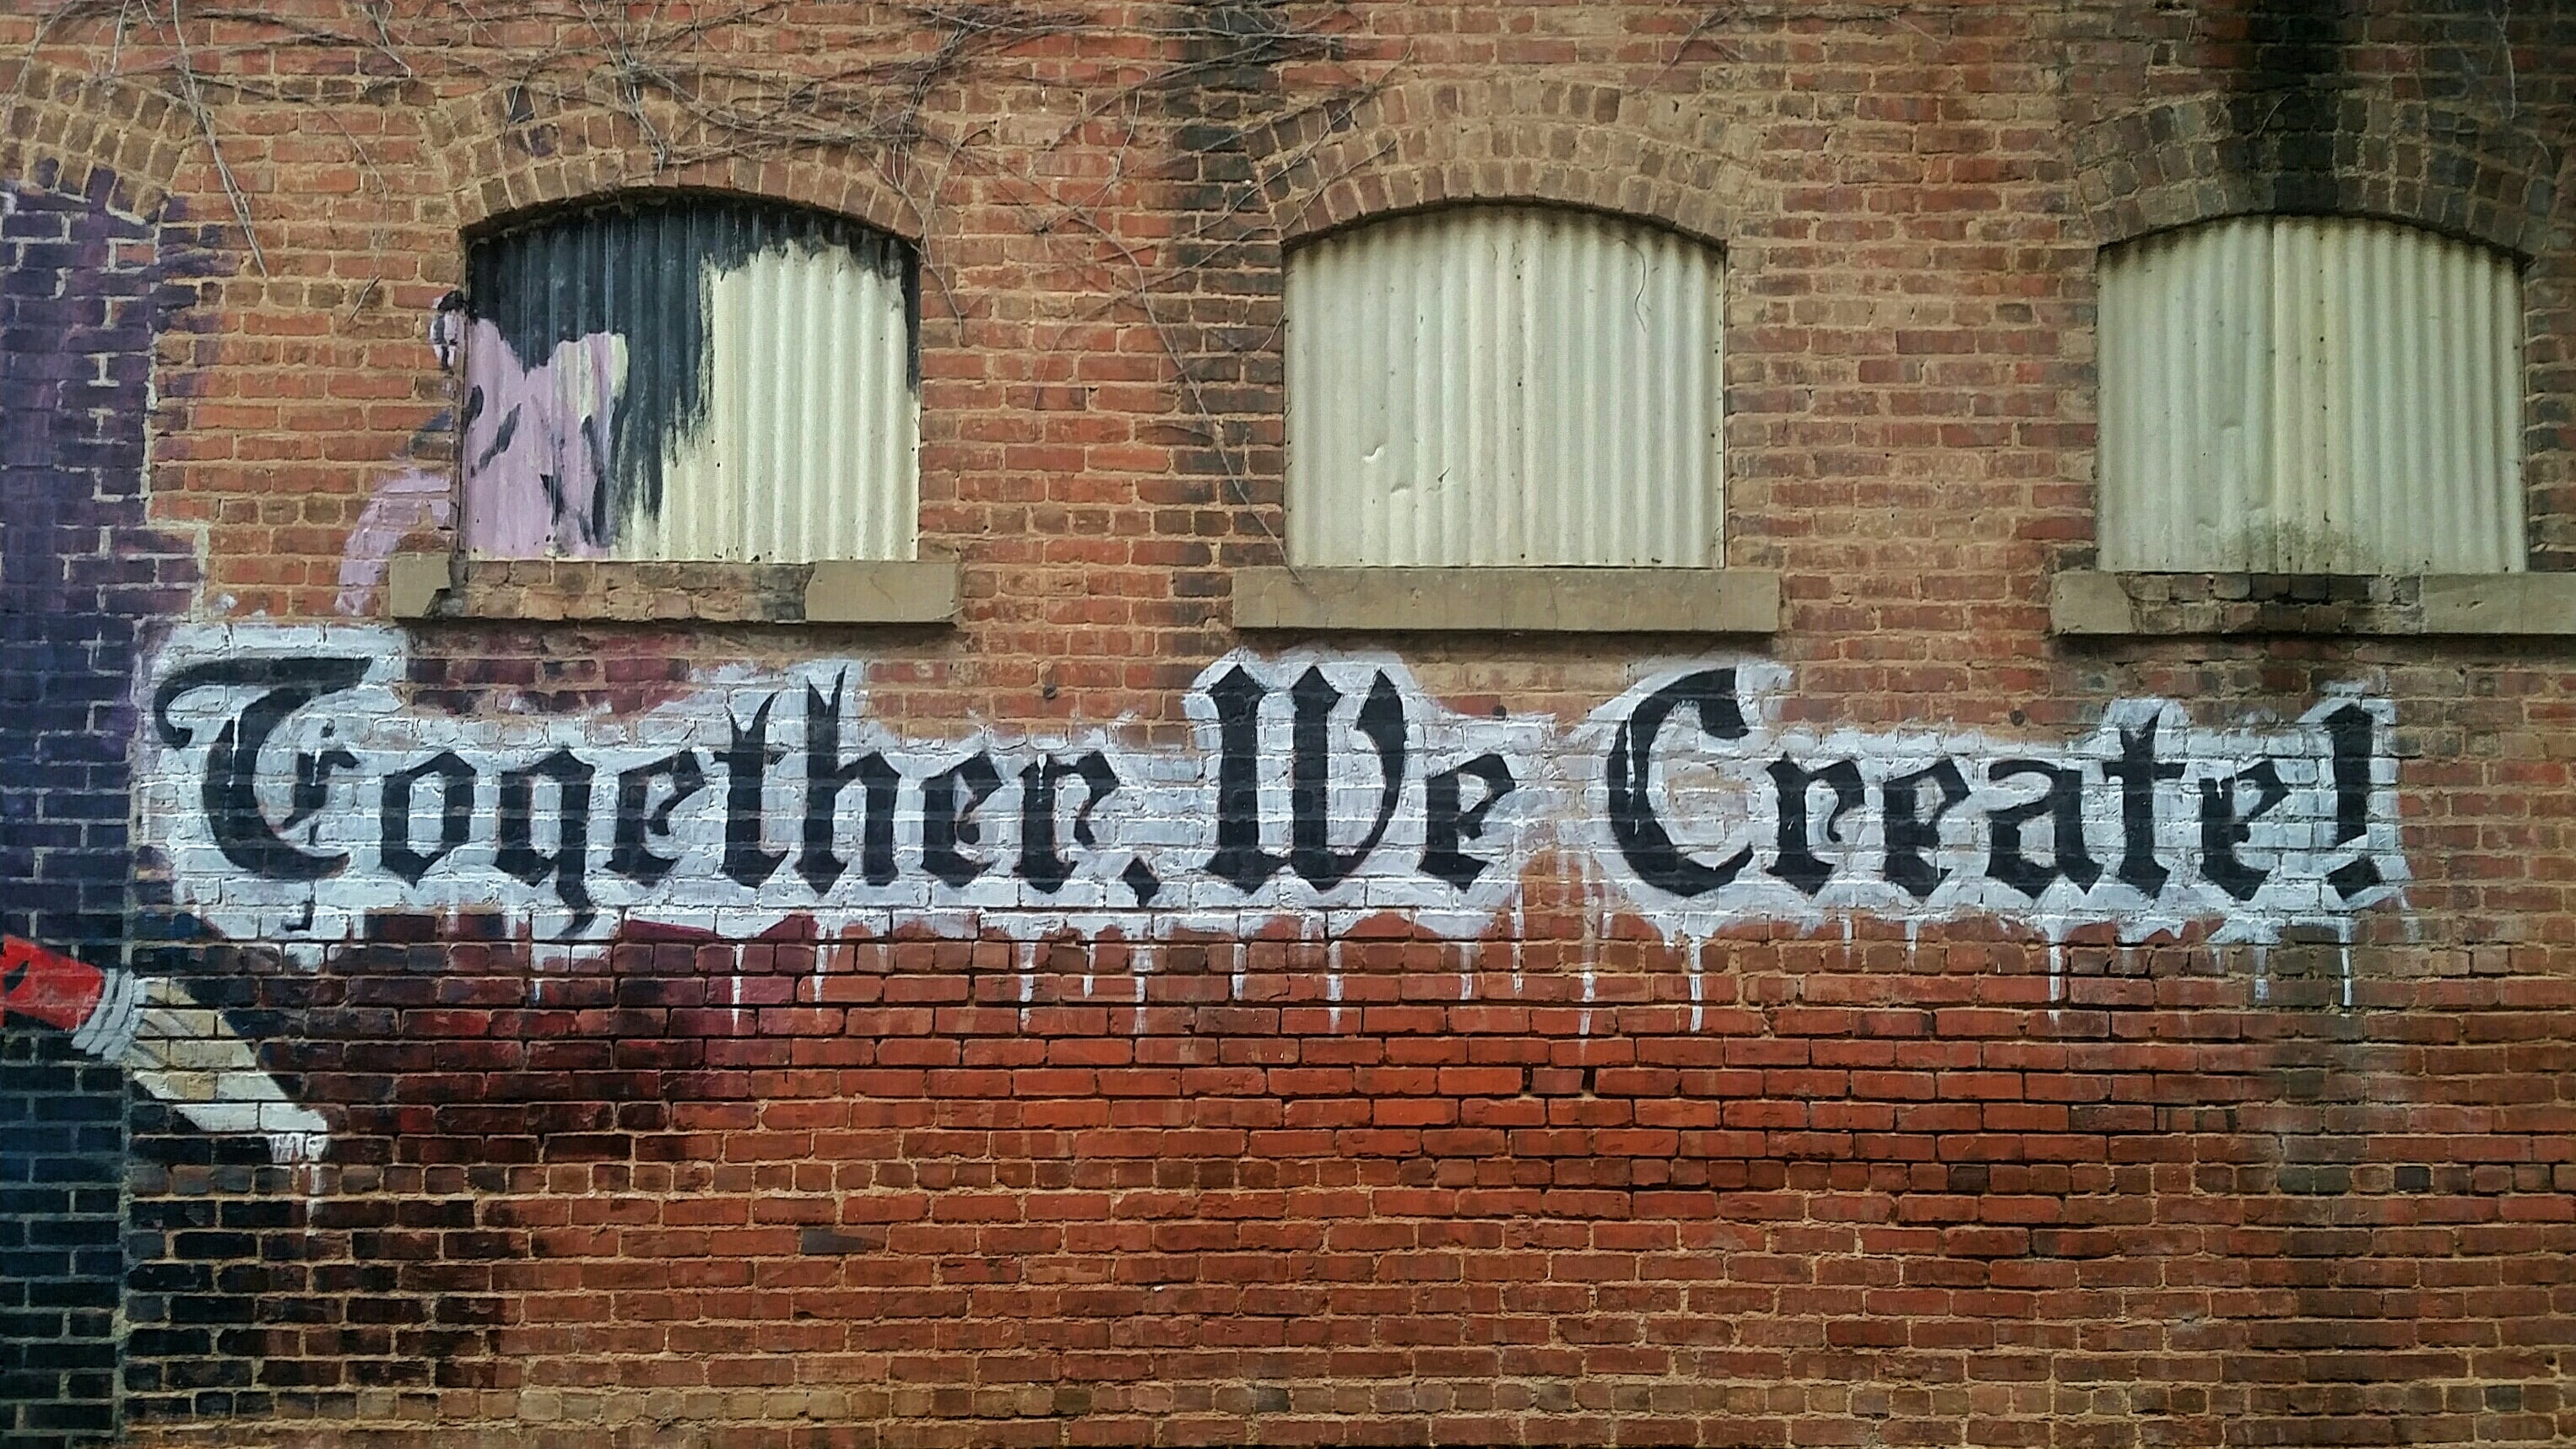 "Together, we create!" on a brick wall